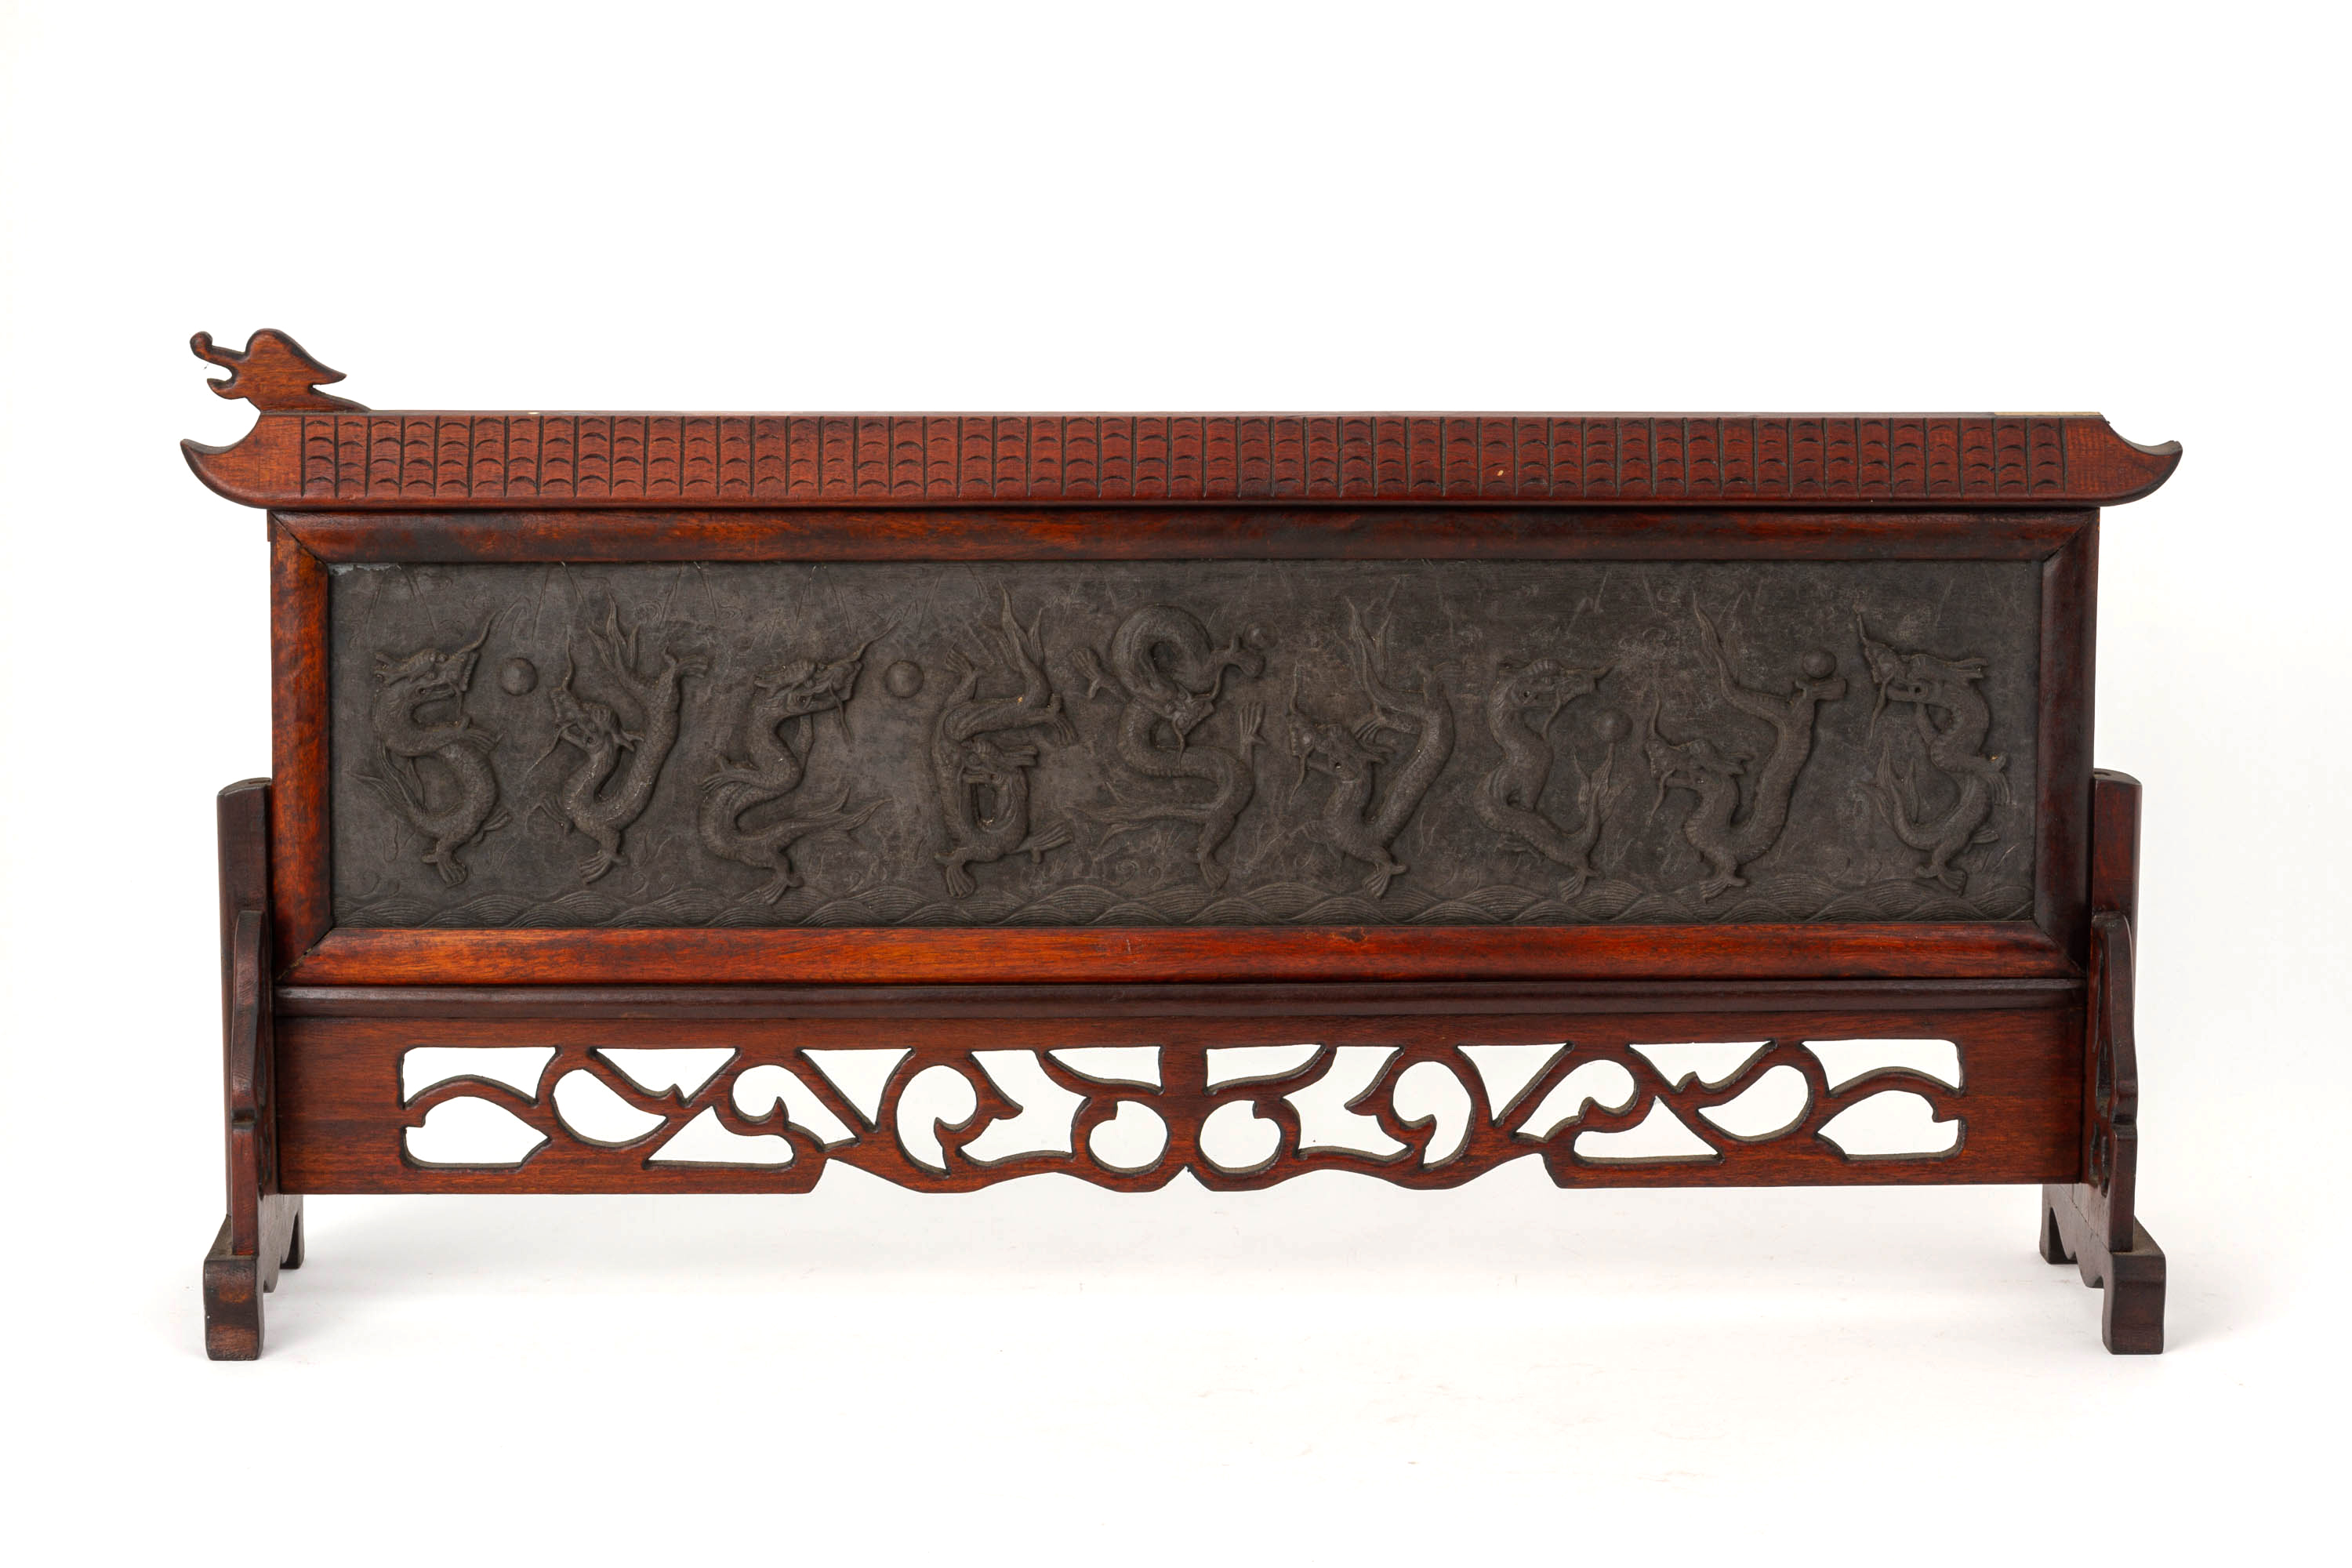 A CARVED STONE DRAGON PANEL AND A LACQUER BOX AND COVER - Image 3 of 3